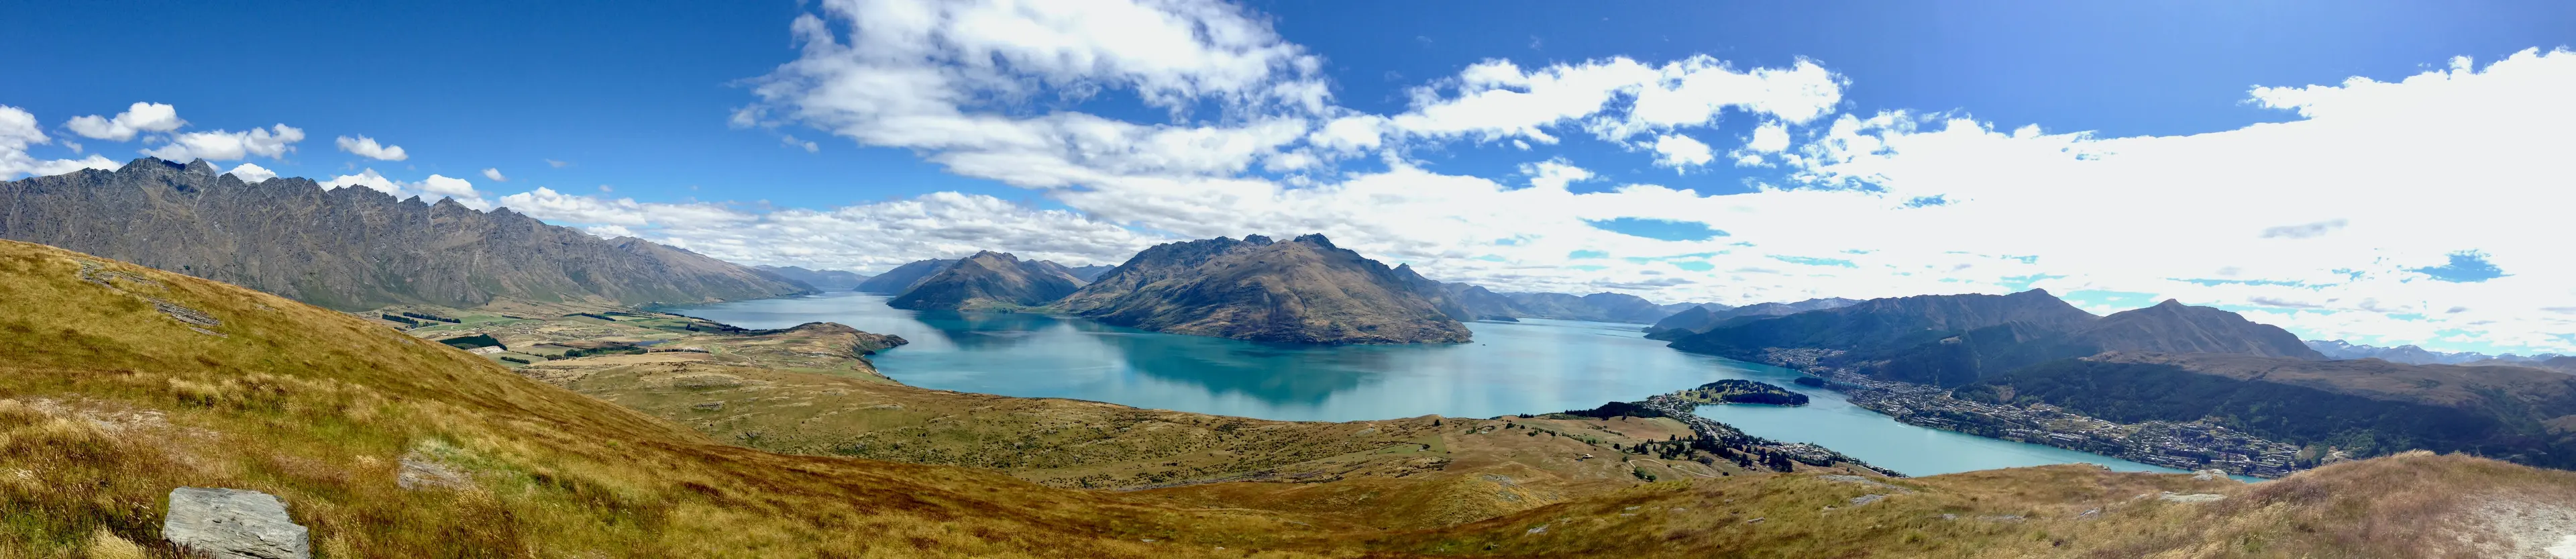 Day Adventure with Friends: Unexplored Queenstown - Food, Wine and Nightlife